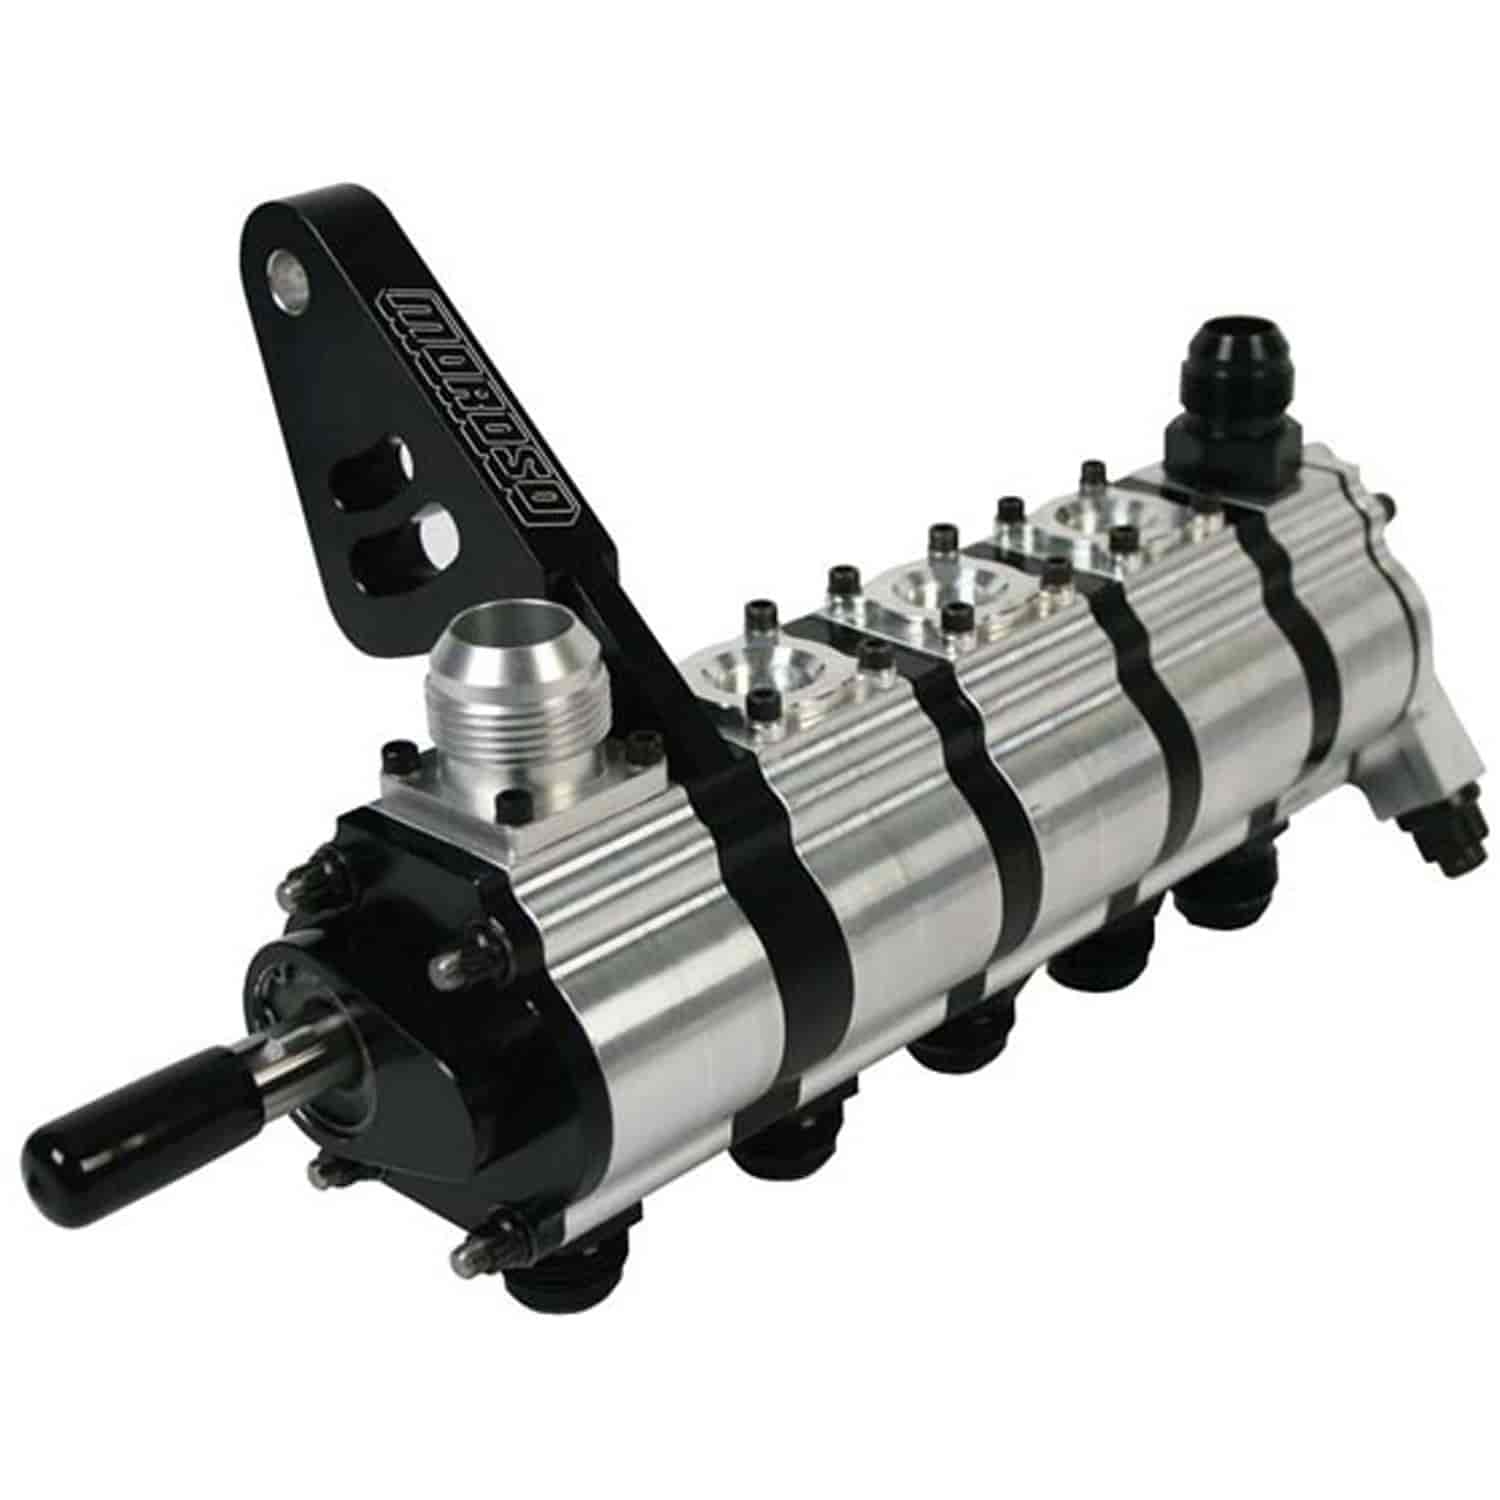 Dry Sump Oil Pump For Dragsters